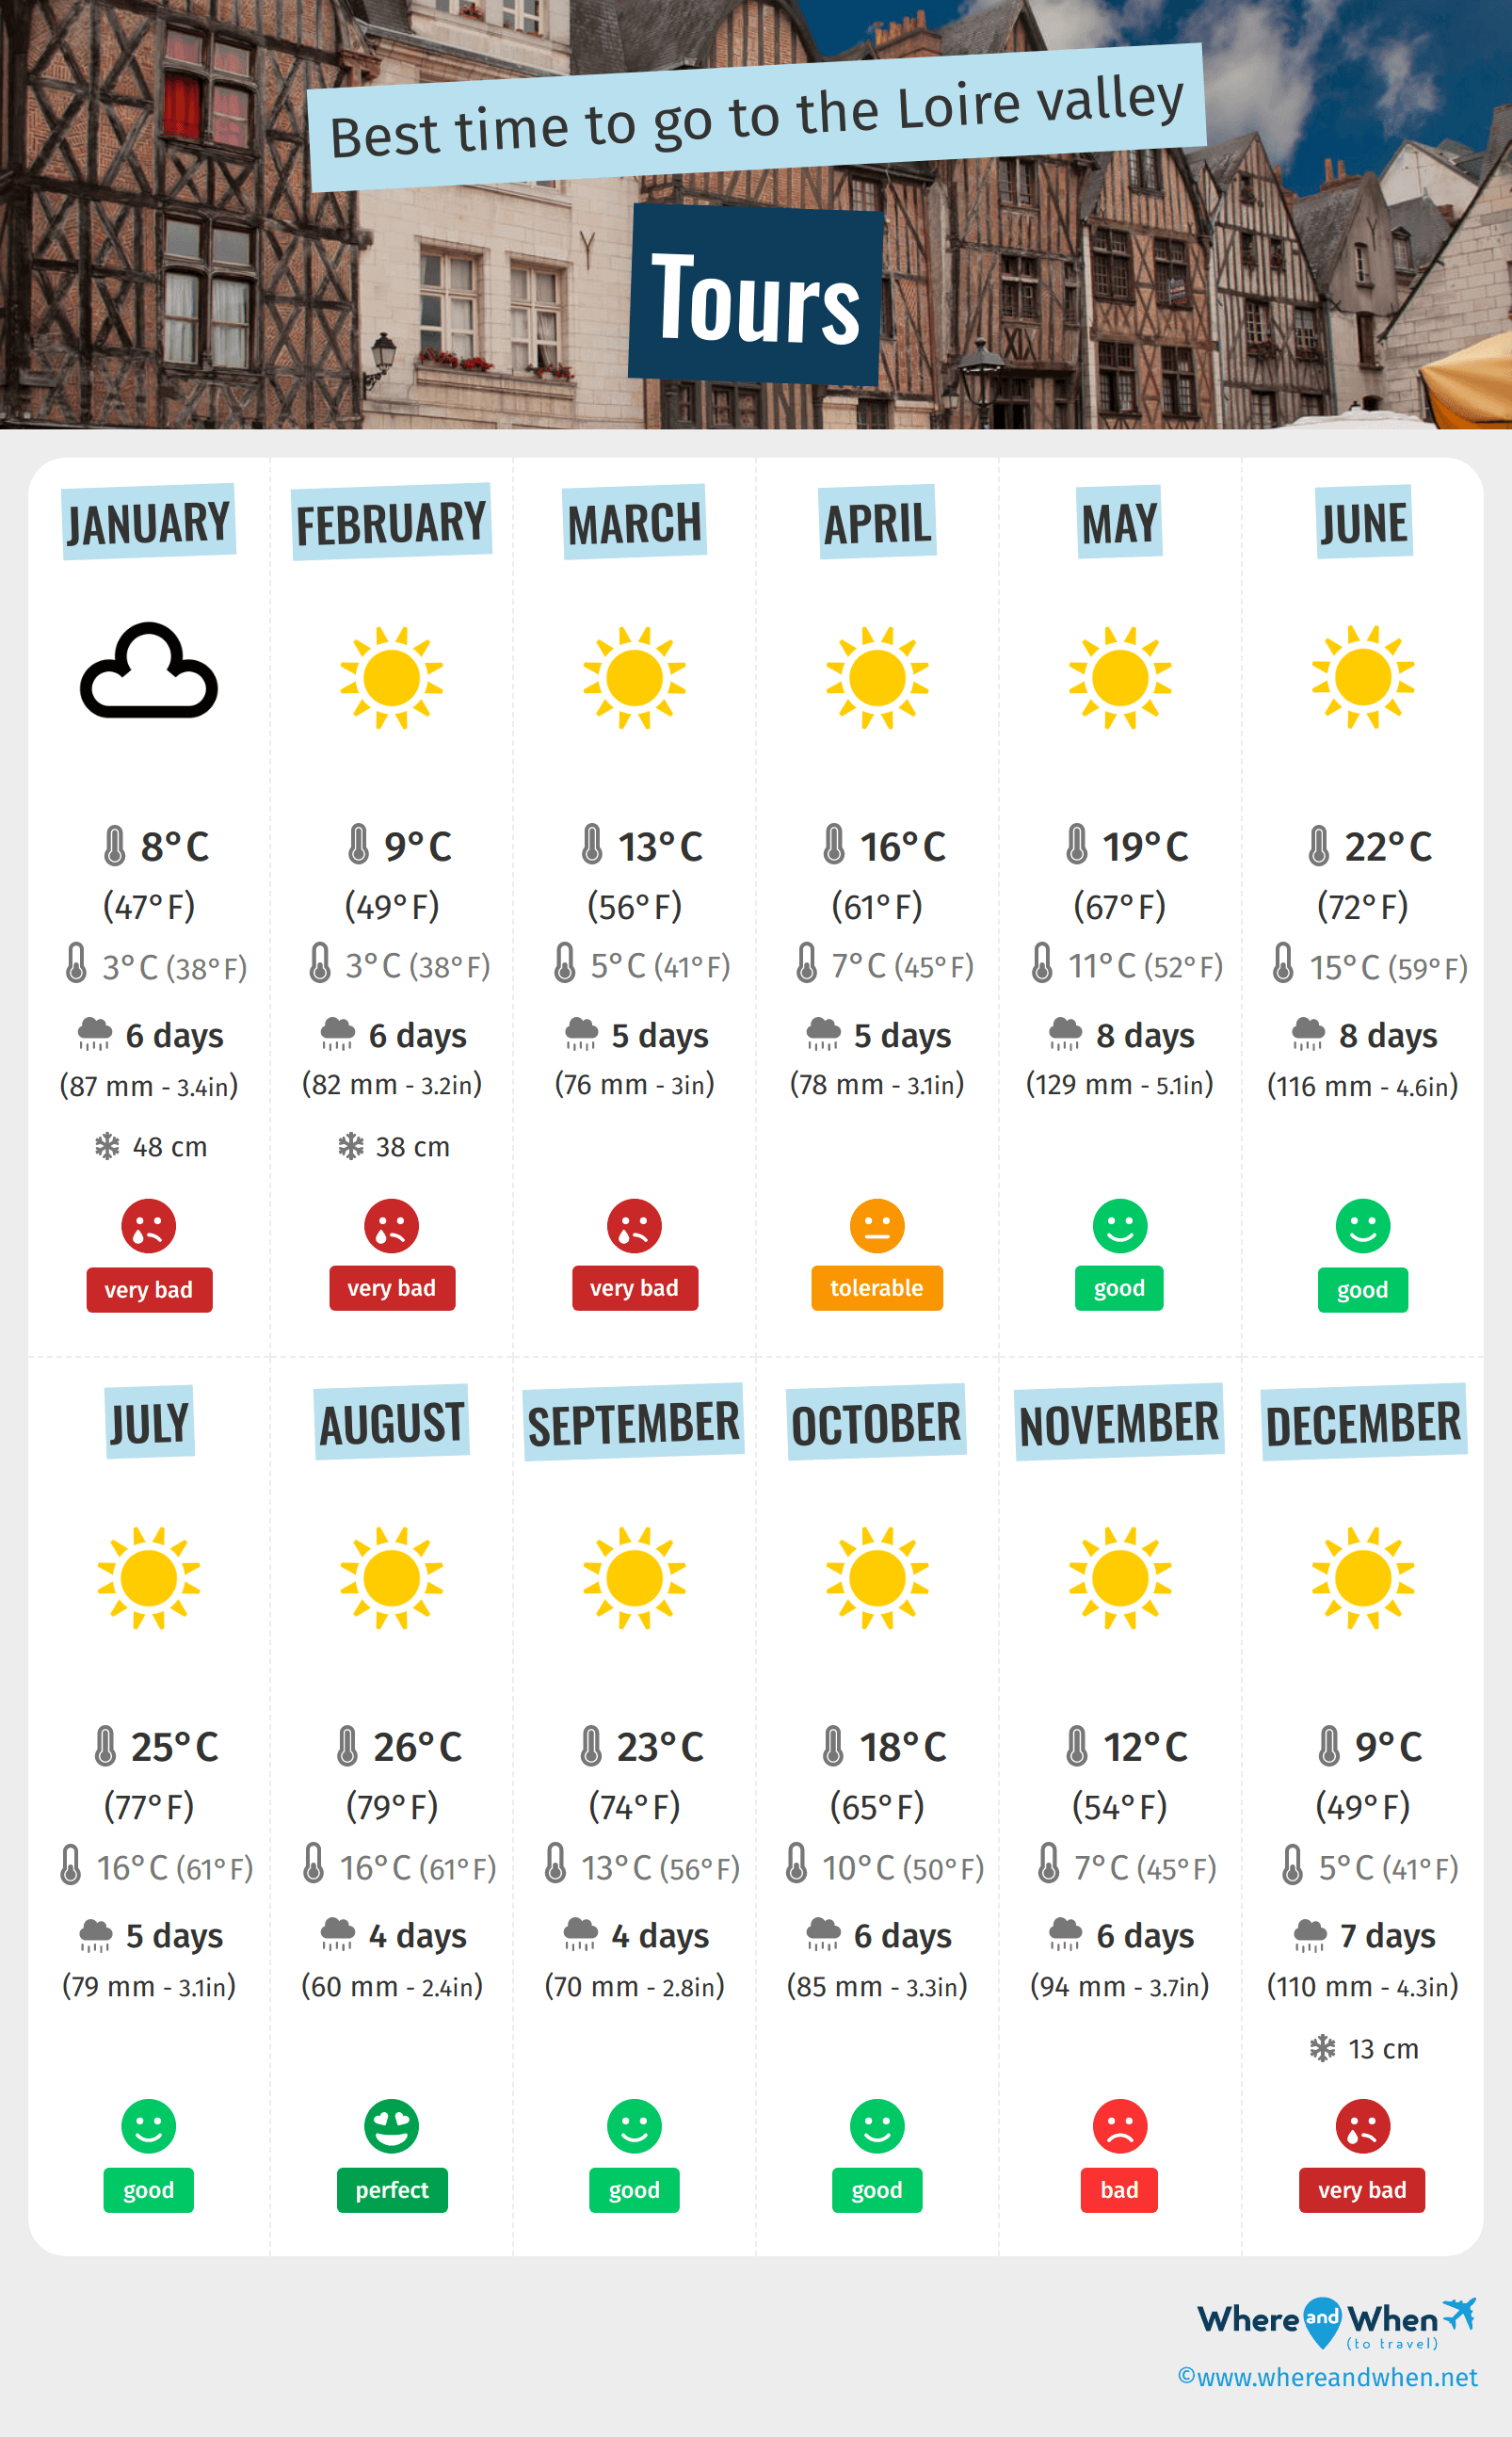 tours weather 30 days